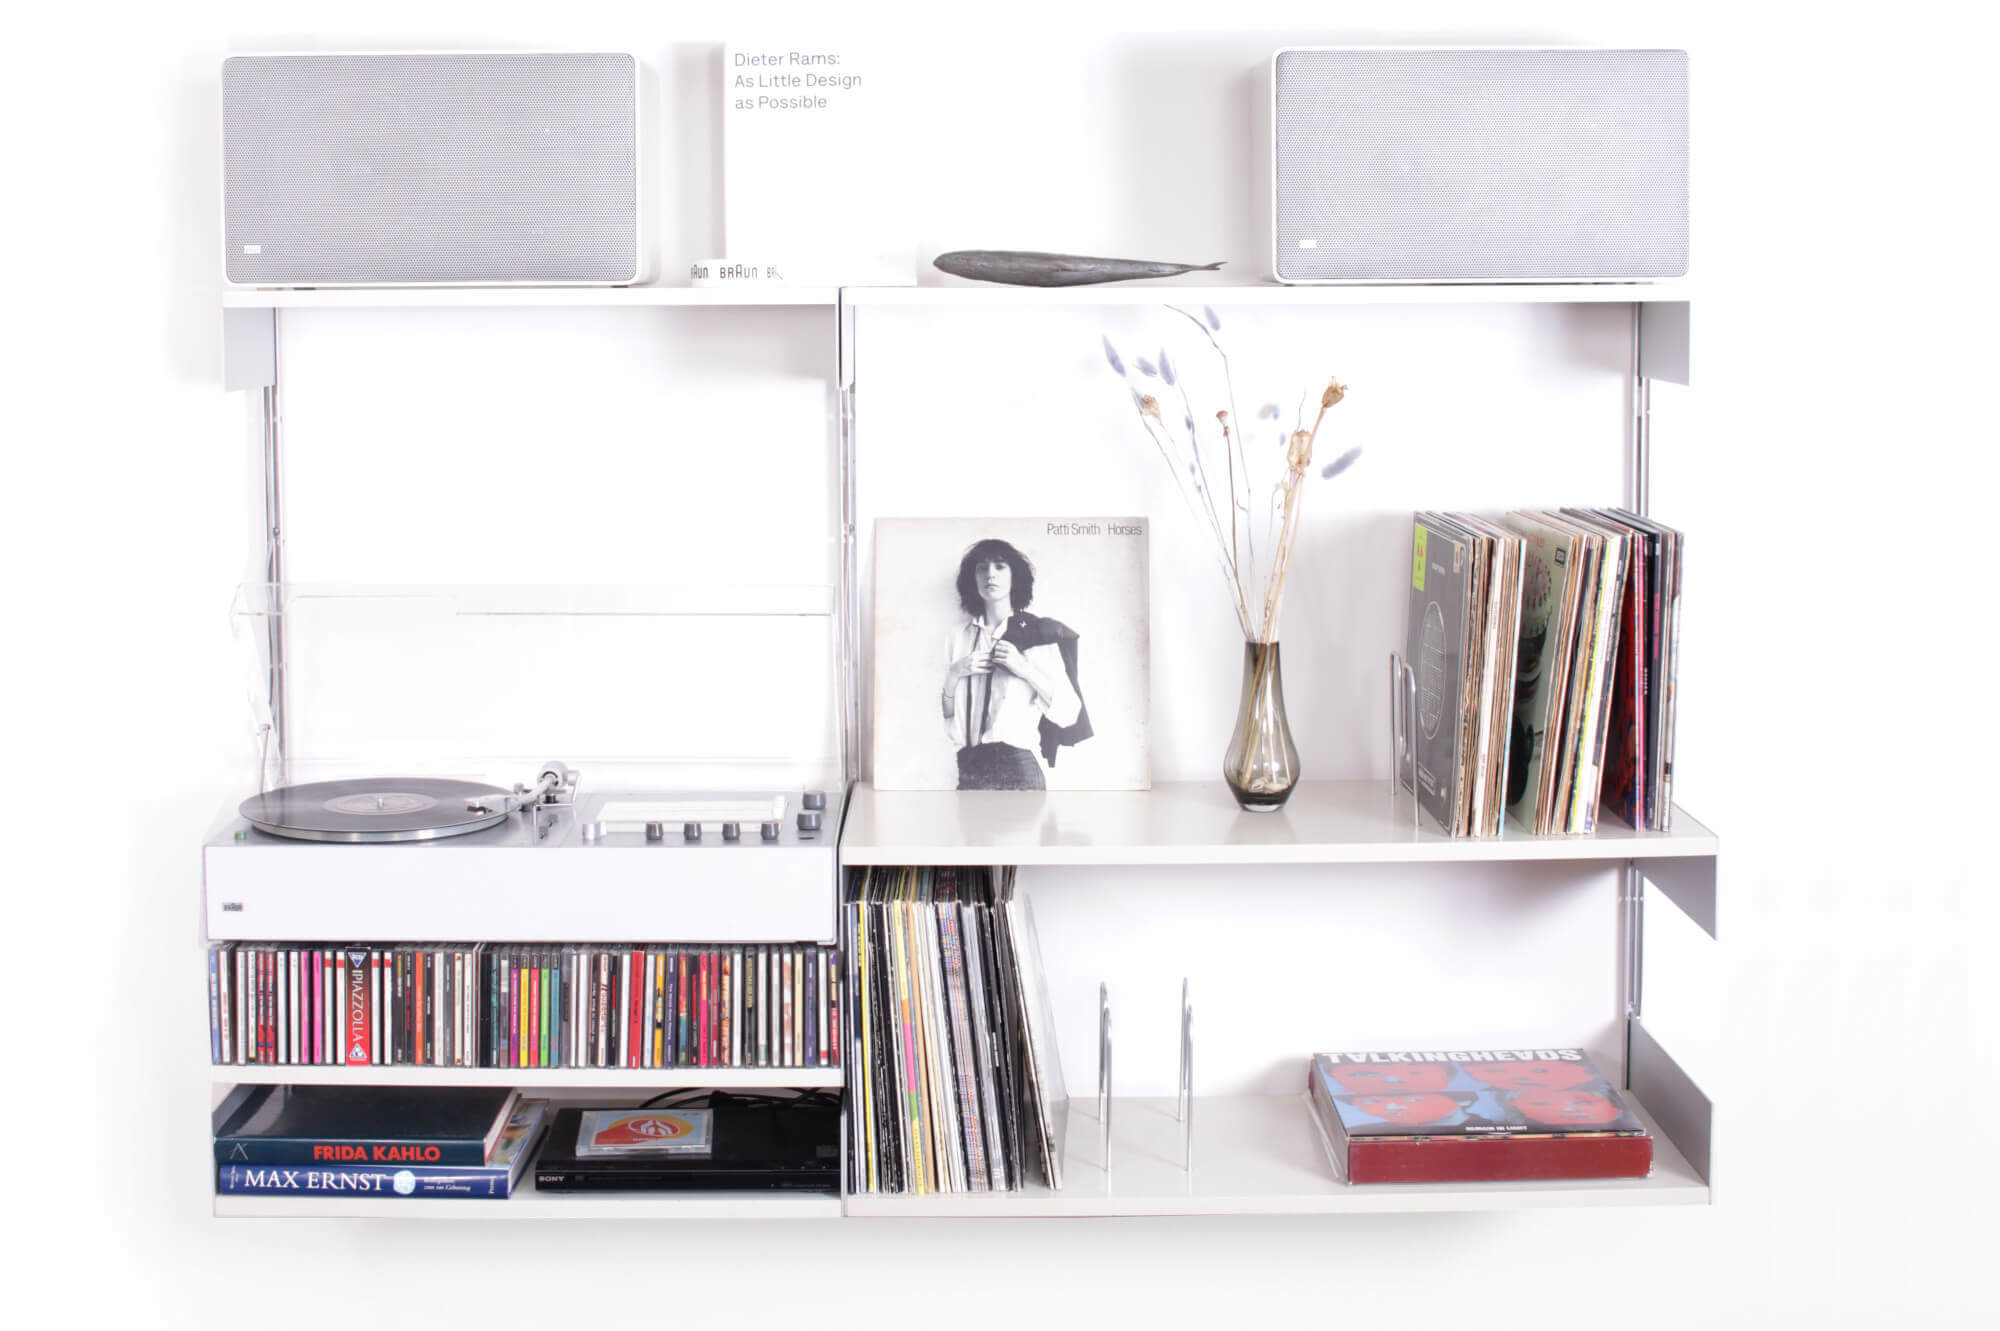 Vitsoe 606 vintage shelf with vinyl record holding brackets and speakers L 625 and hooked-in audio 310